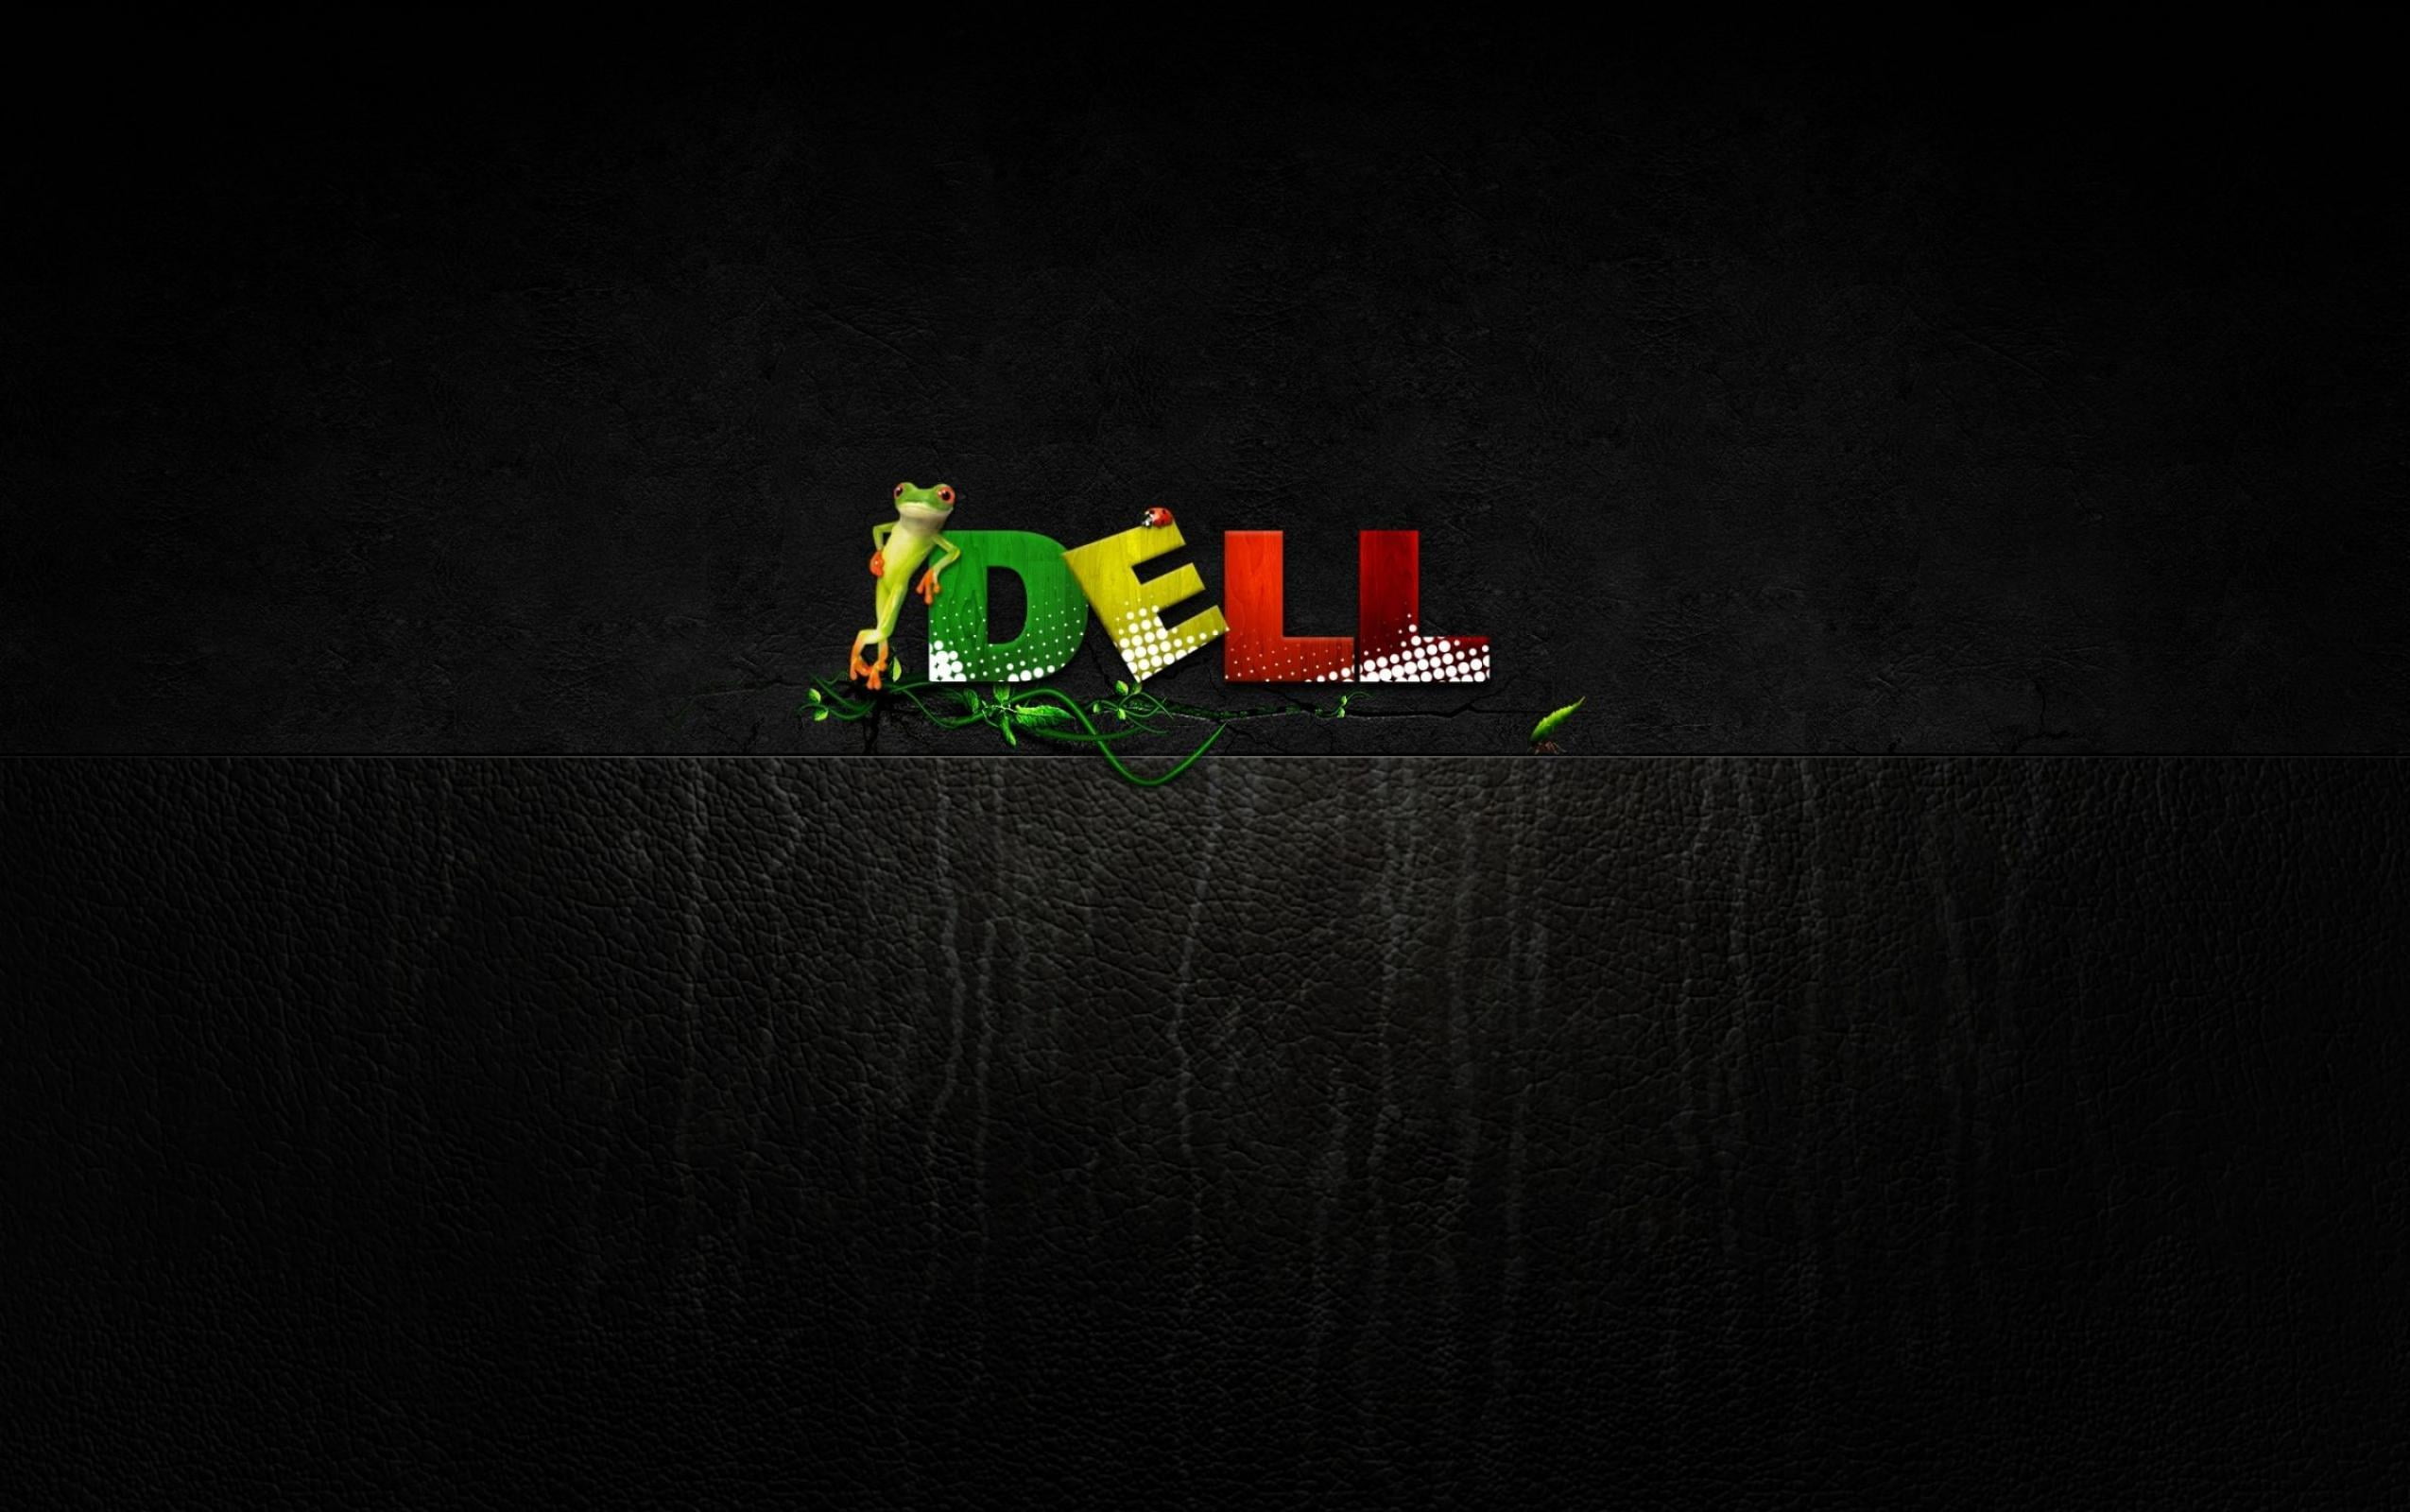 Dell Geico, Dell logo, Computers, frog, toy, childhood, black background